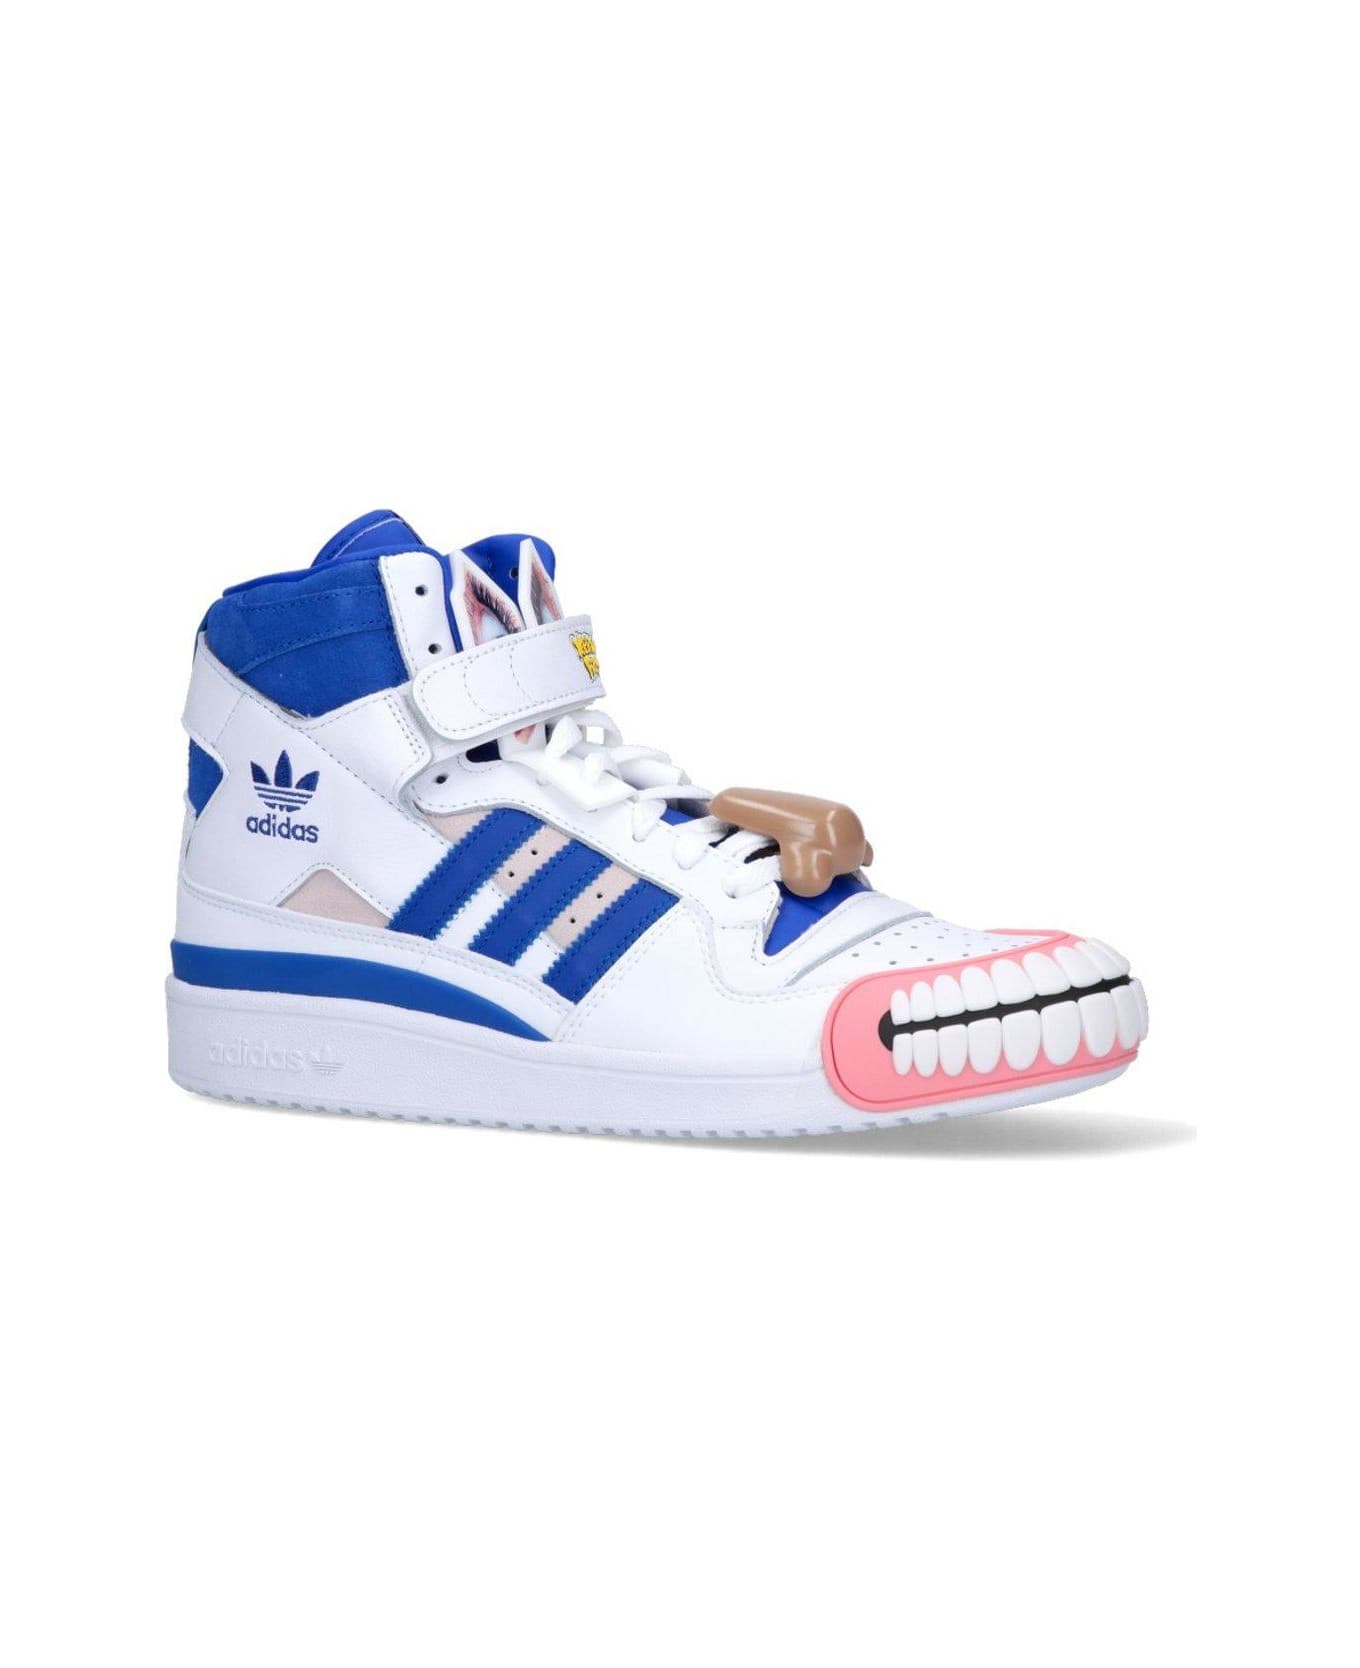 Adidas Forum High X Kerwin Frost High-top Sneakers - White